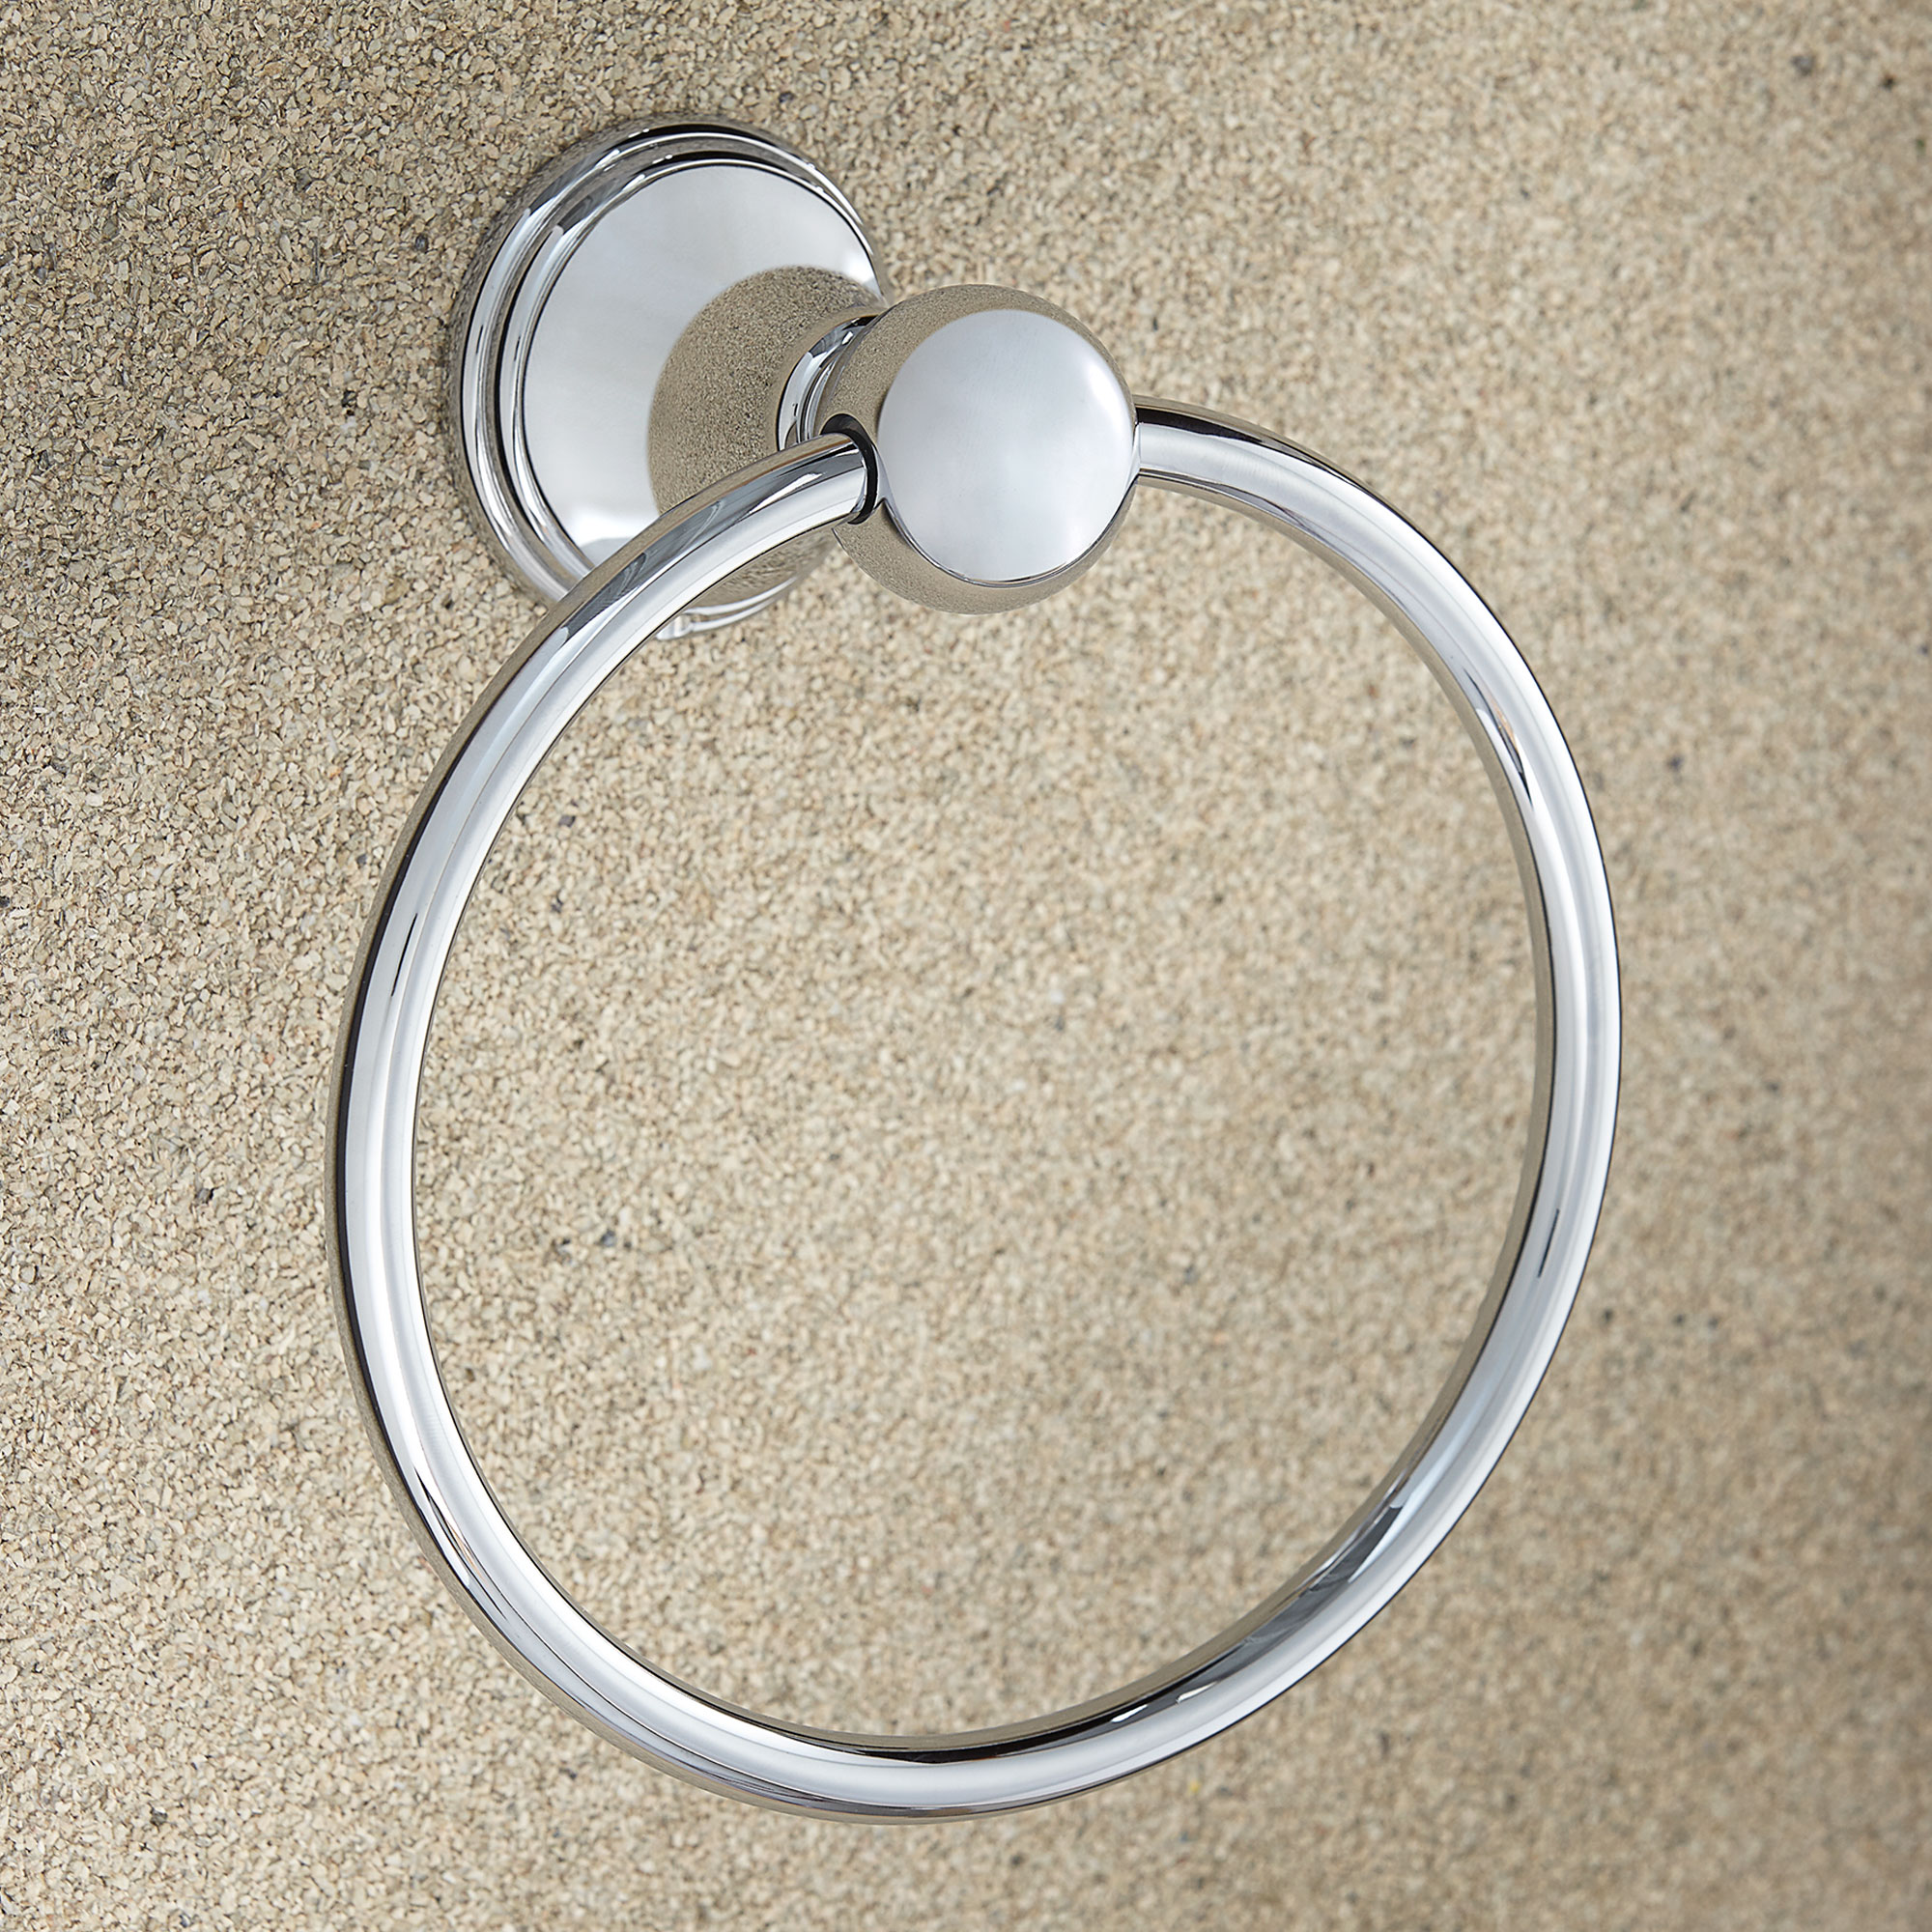 Ashbee Towel Ring